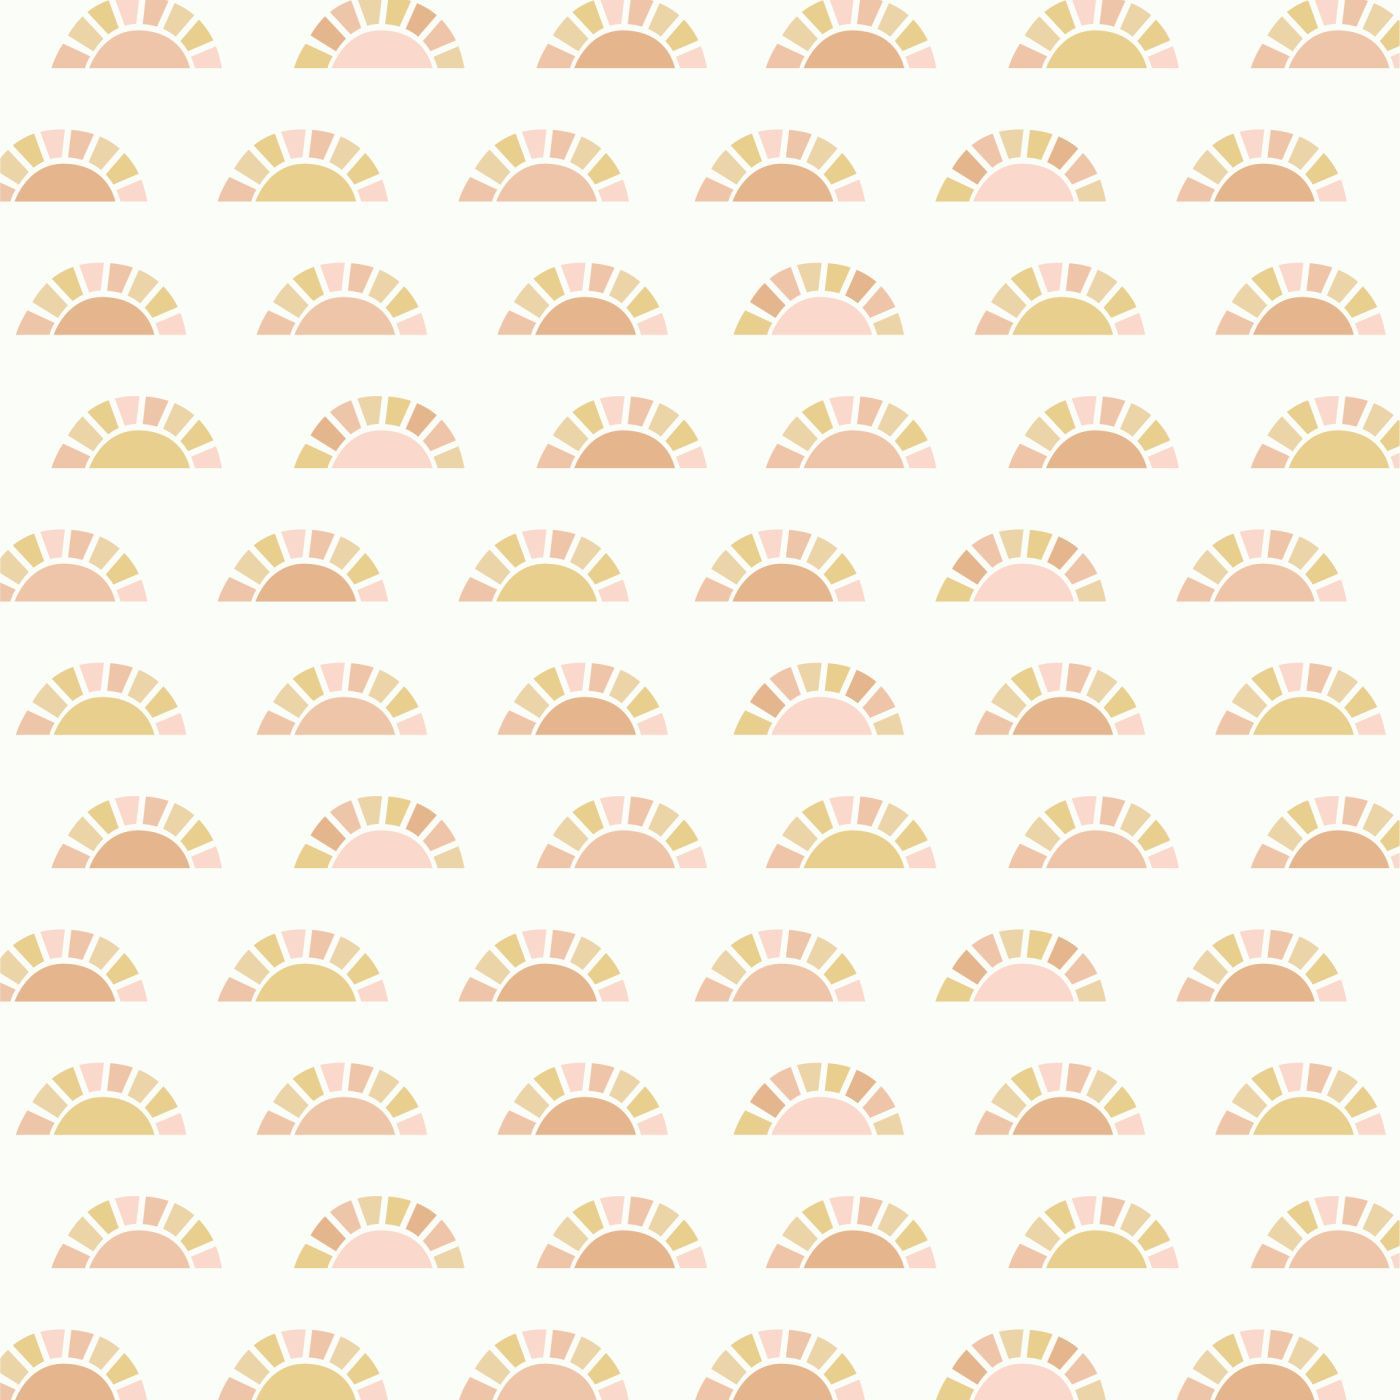 A repeating pattern of abstract shapes in pastel shades - Sunshine